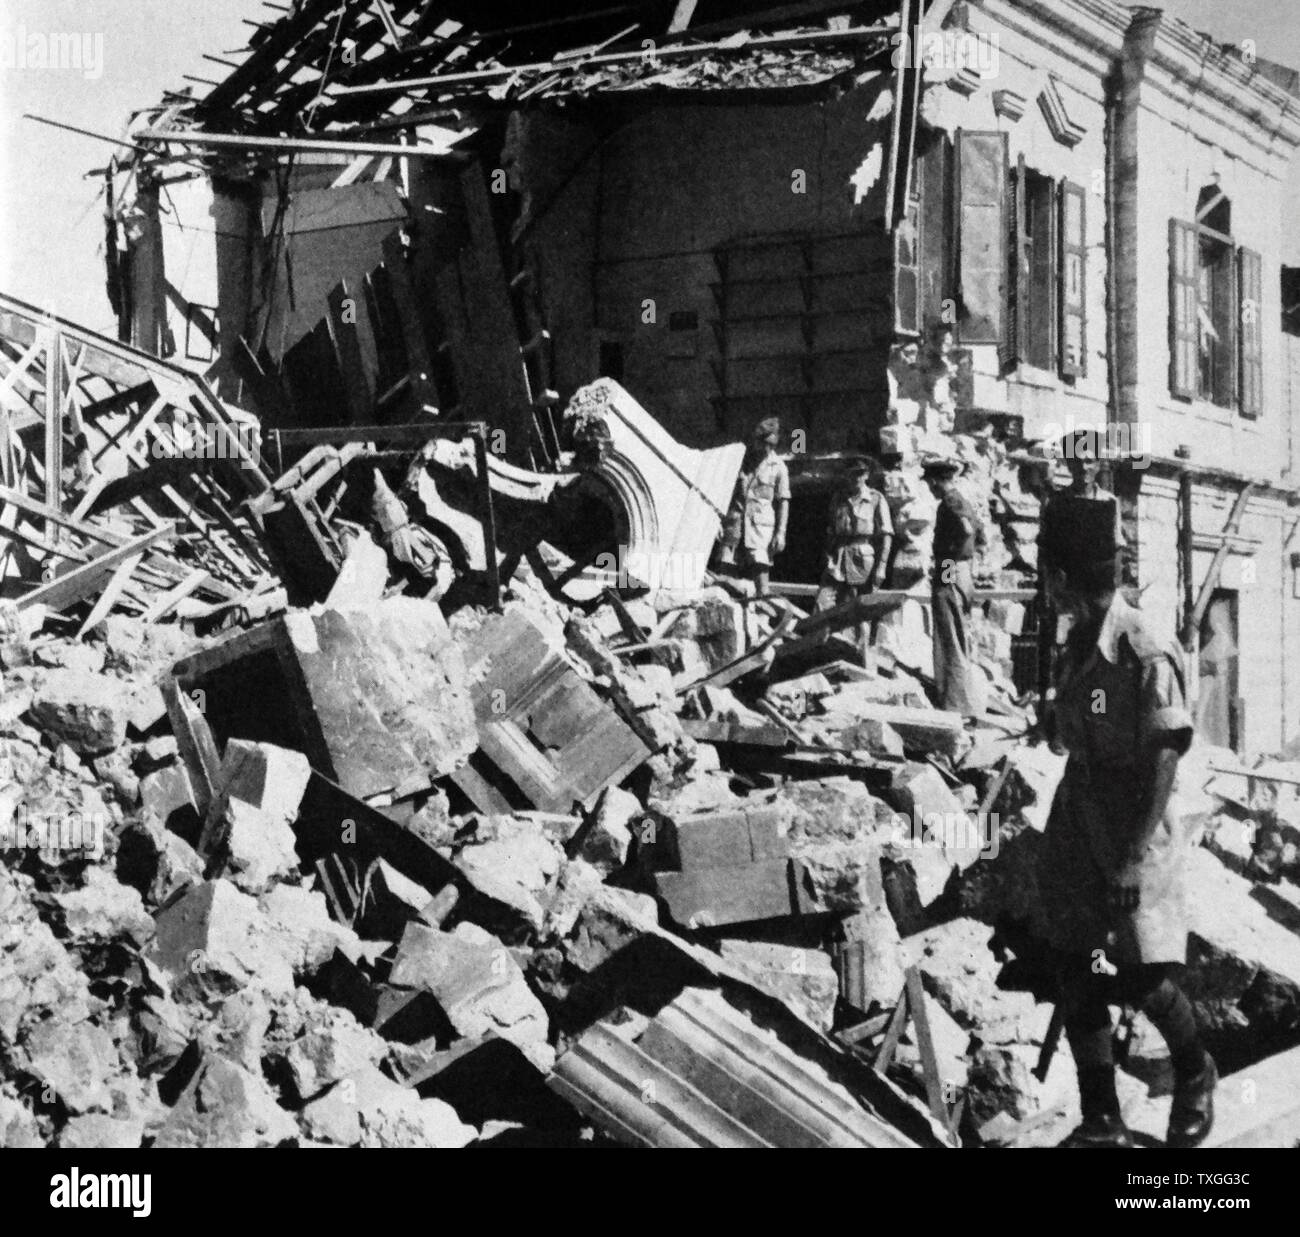 bombing carried out on Monday July 22, 1946 by the militant Zionist underground organization, the Irgun, on the British administrative headquarters for Palestine at the King David Hotel in Jerusalem. 91 people of various nationalities were killed and 46 were injured Stock Photo